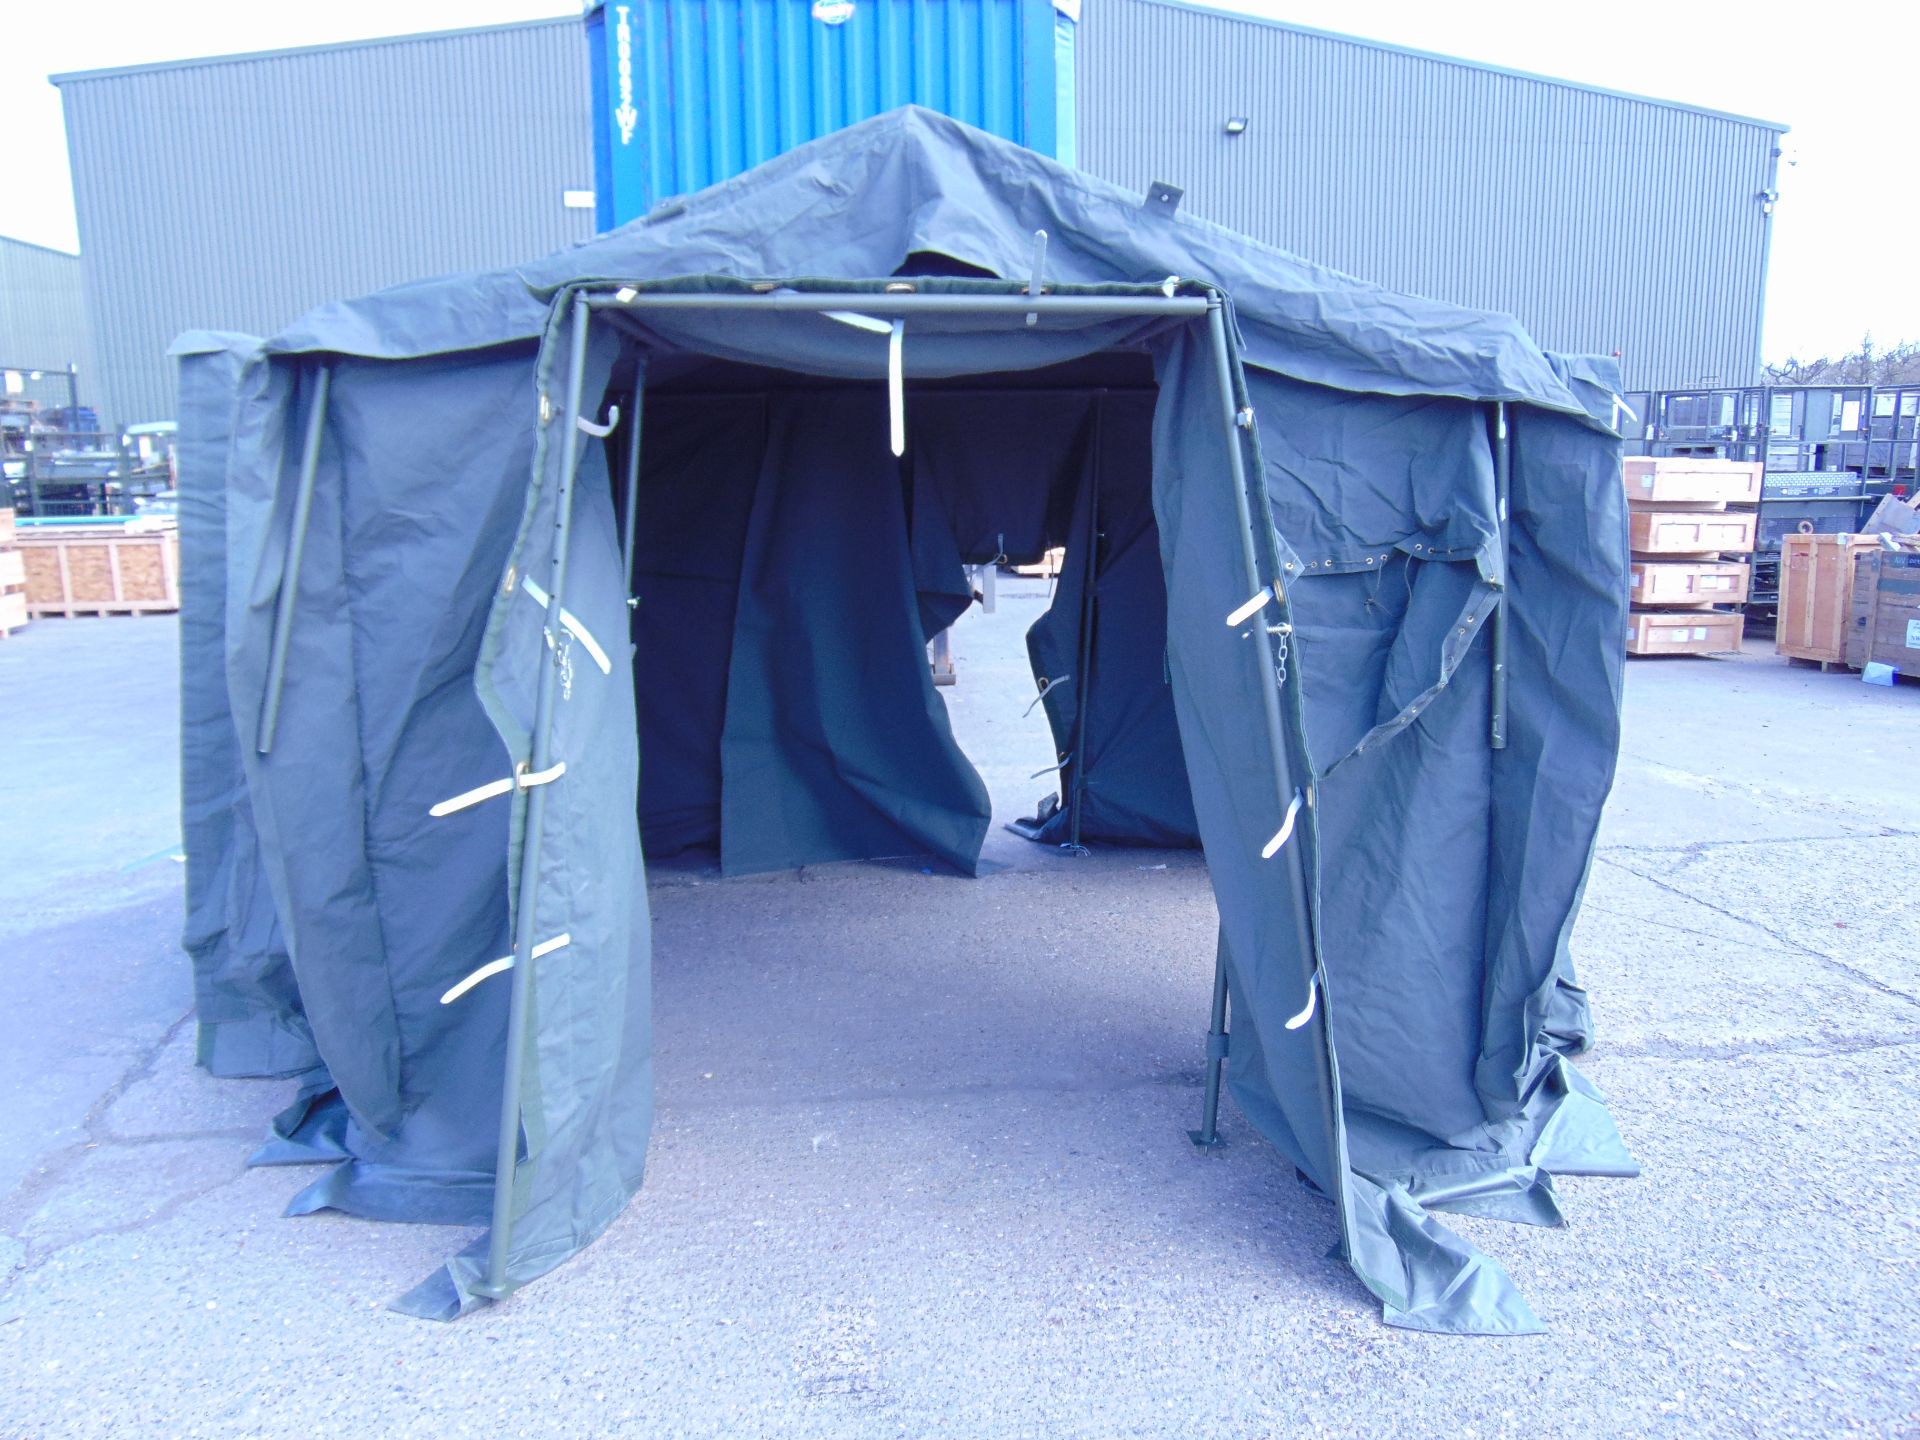 8'x8' Fv432 Closed Command/Sleeping Tent - Image 4 of 8